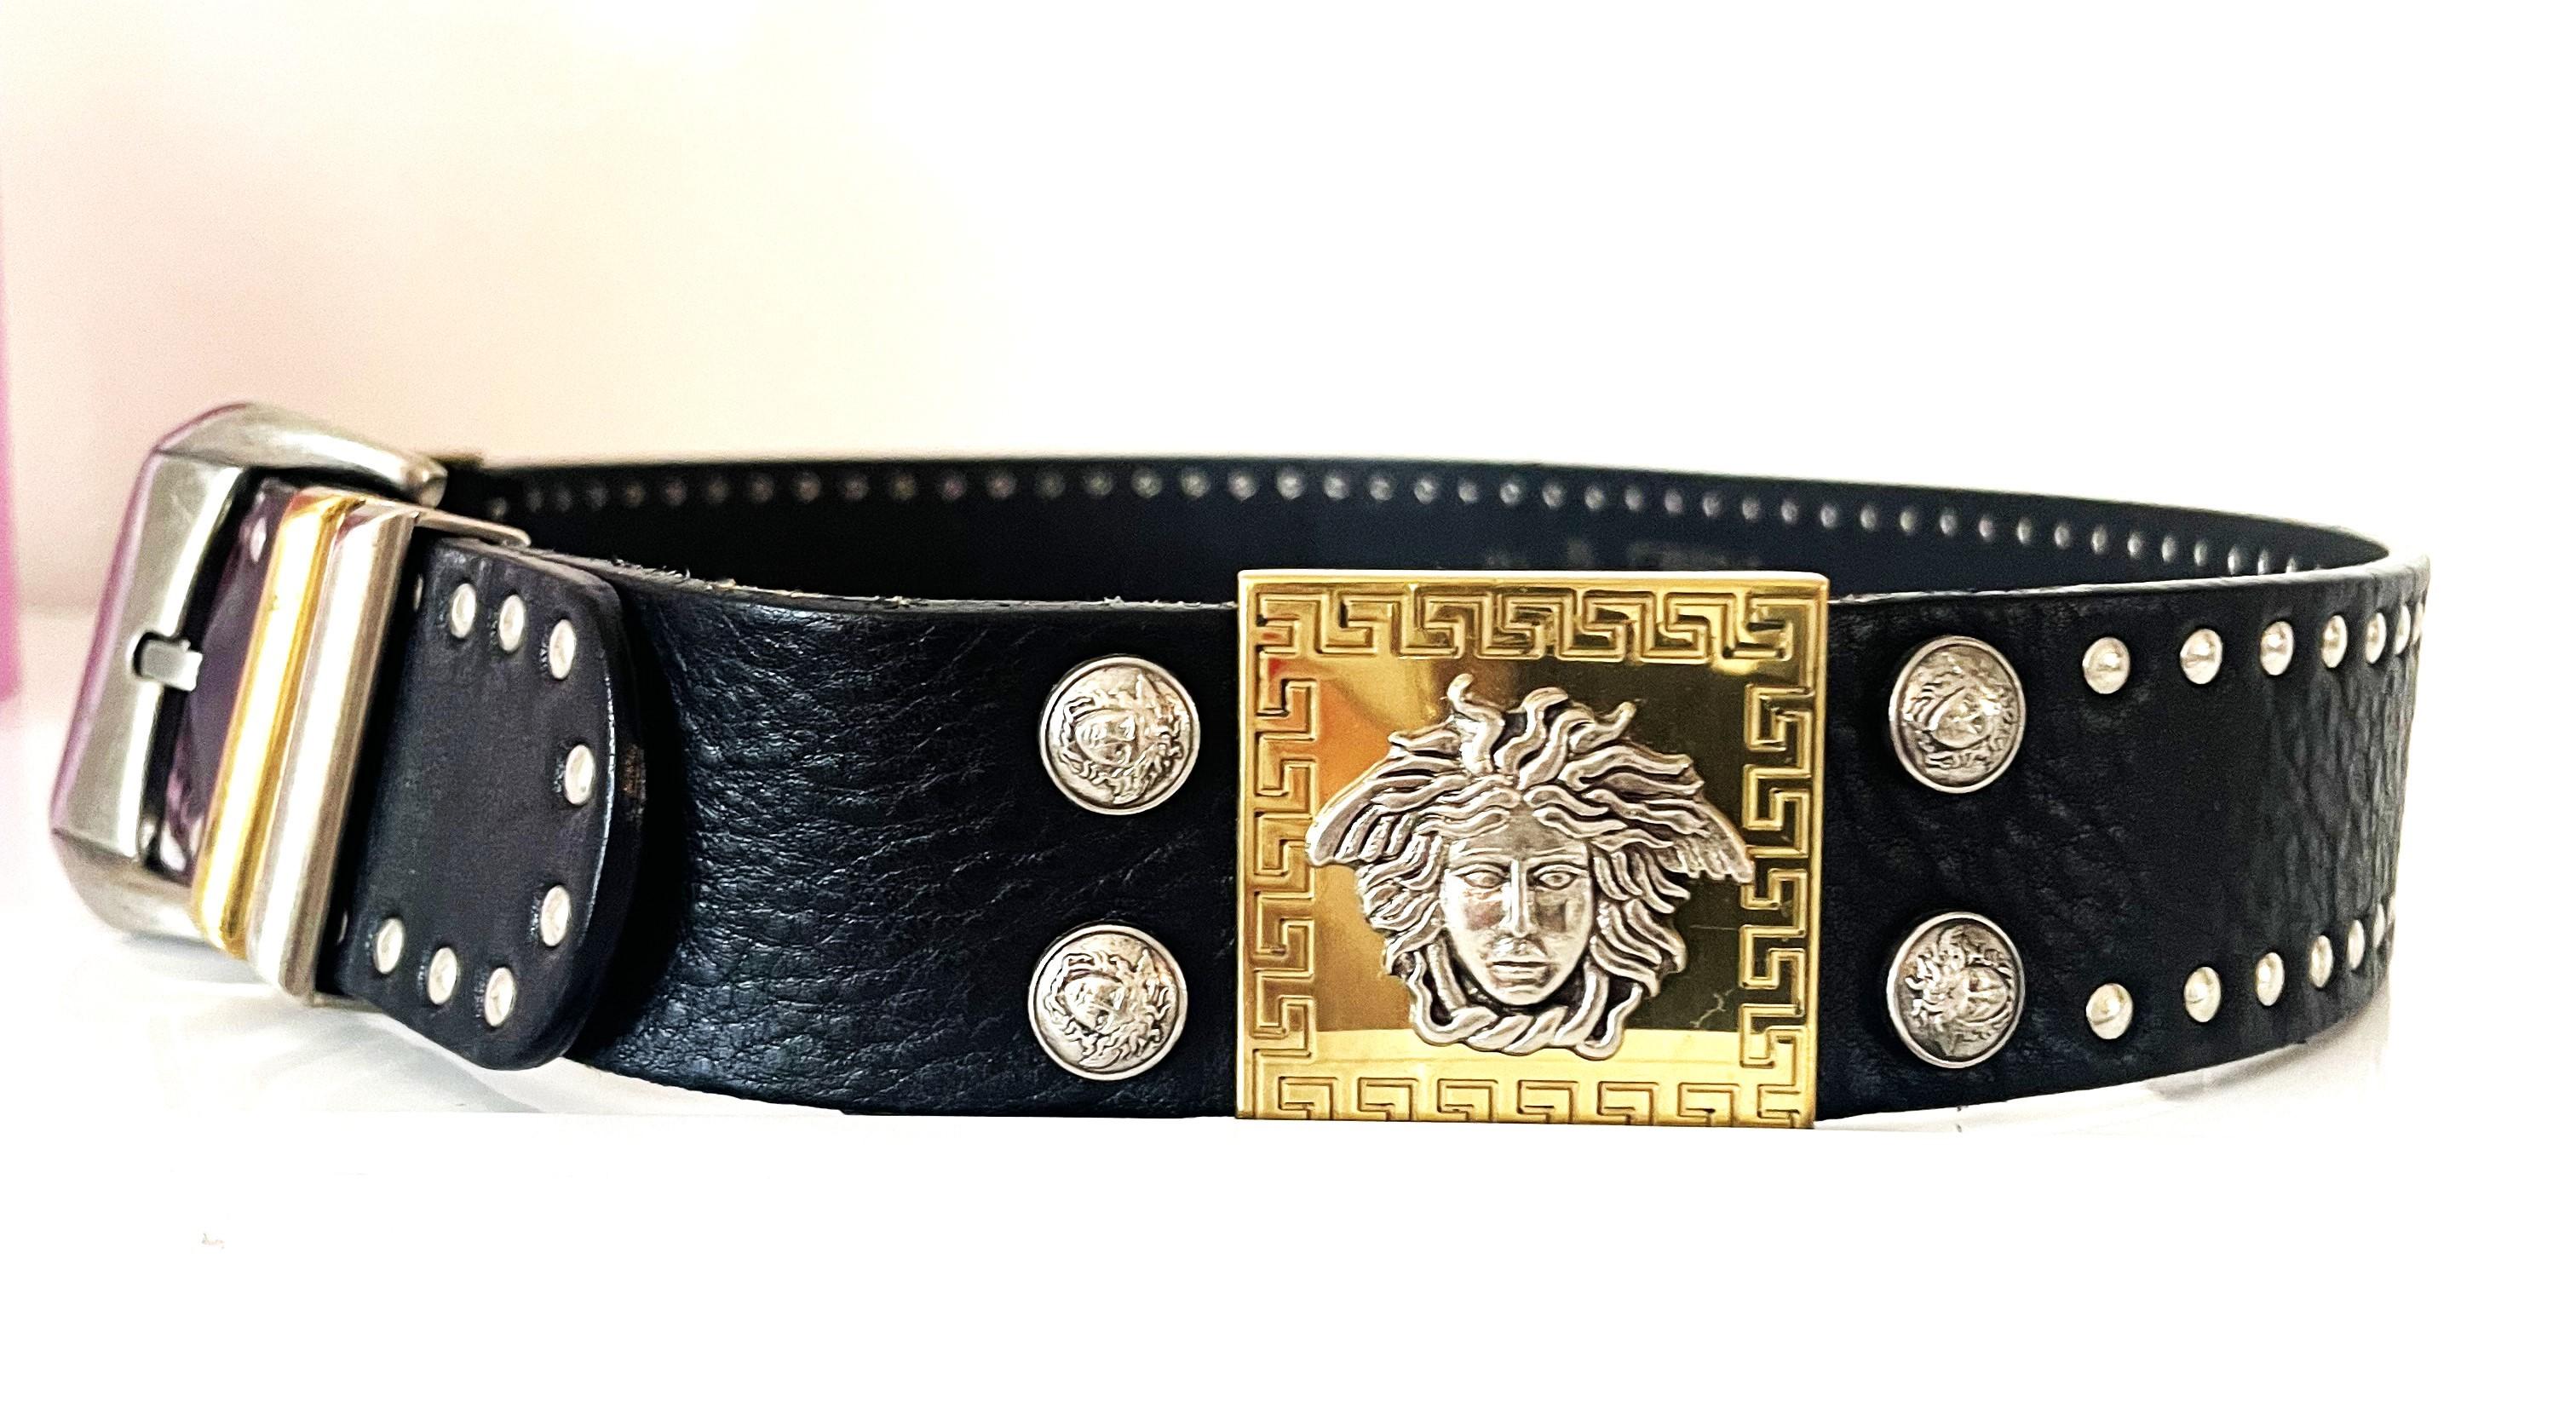 Stunning & rare collectors item this eye catching 90's Gianni Versace studded leather Belt from the runway 1992 (hard to find similar because of the square frame), Two tone buckle and large silver Medusa on gold square backing framed with small